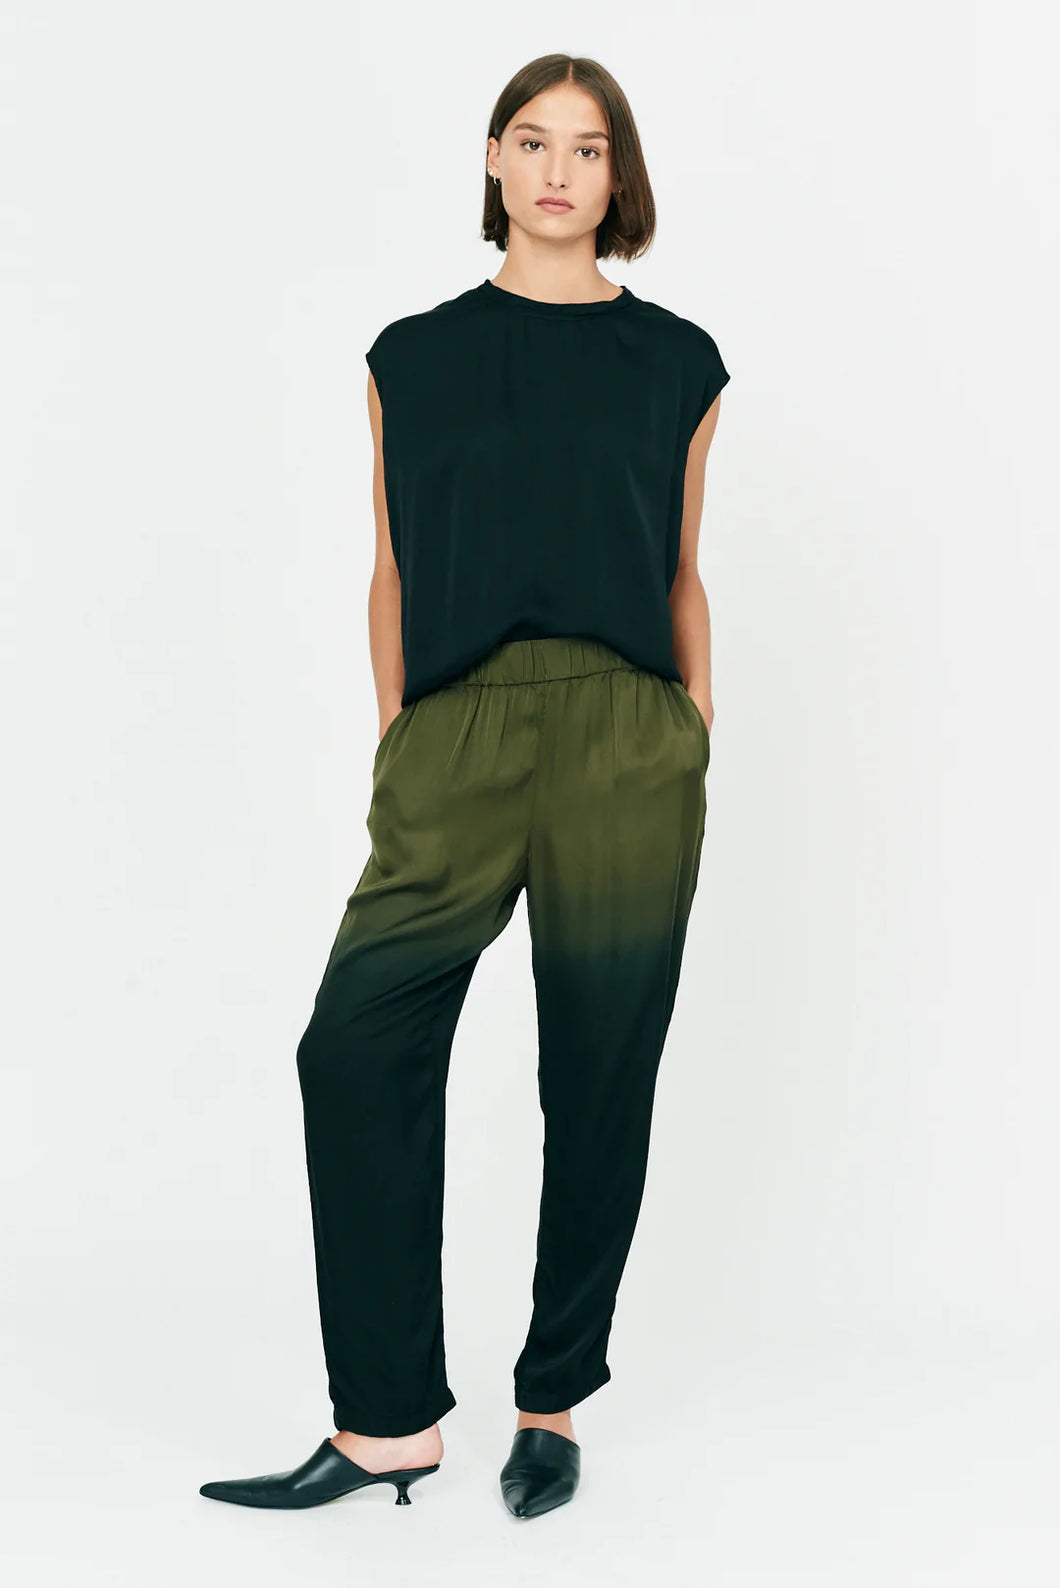 Fez Trousers in Forest Gradient